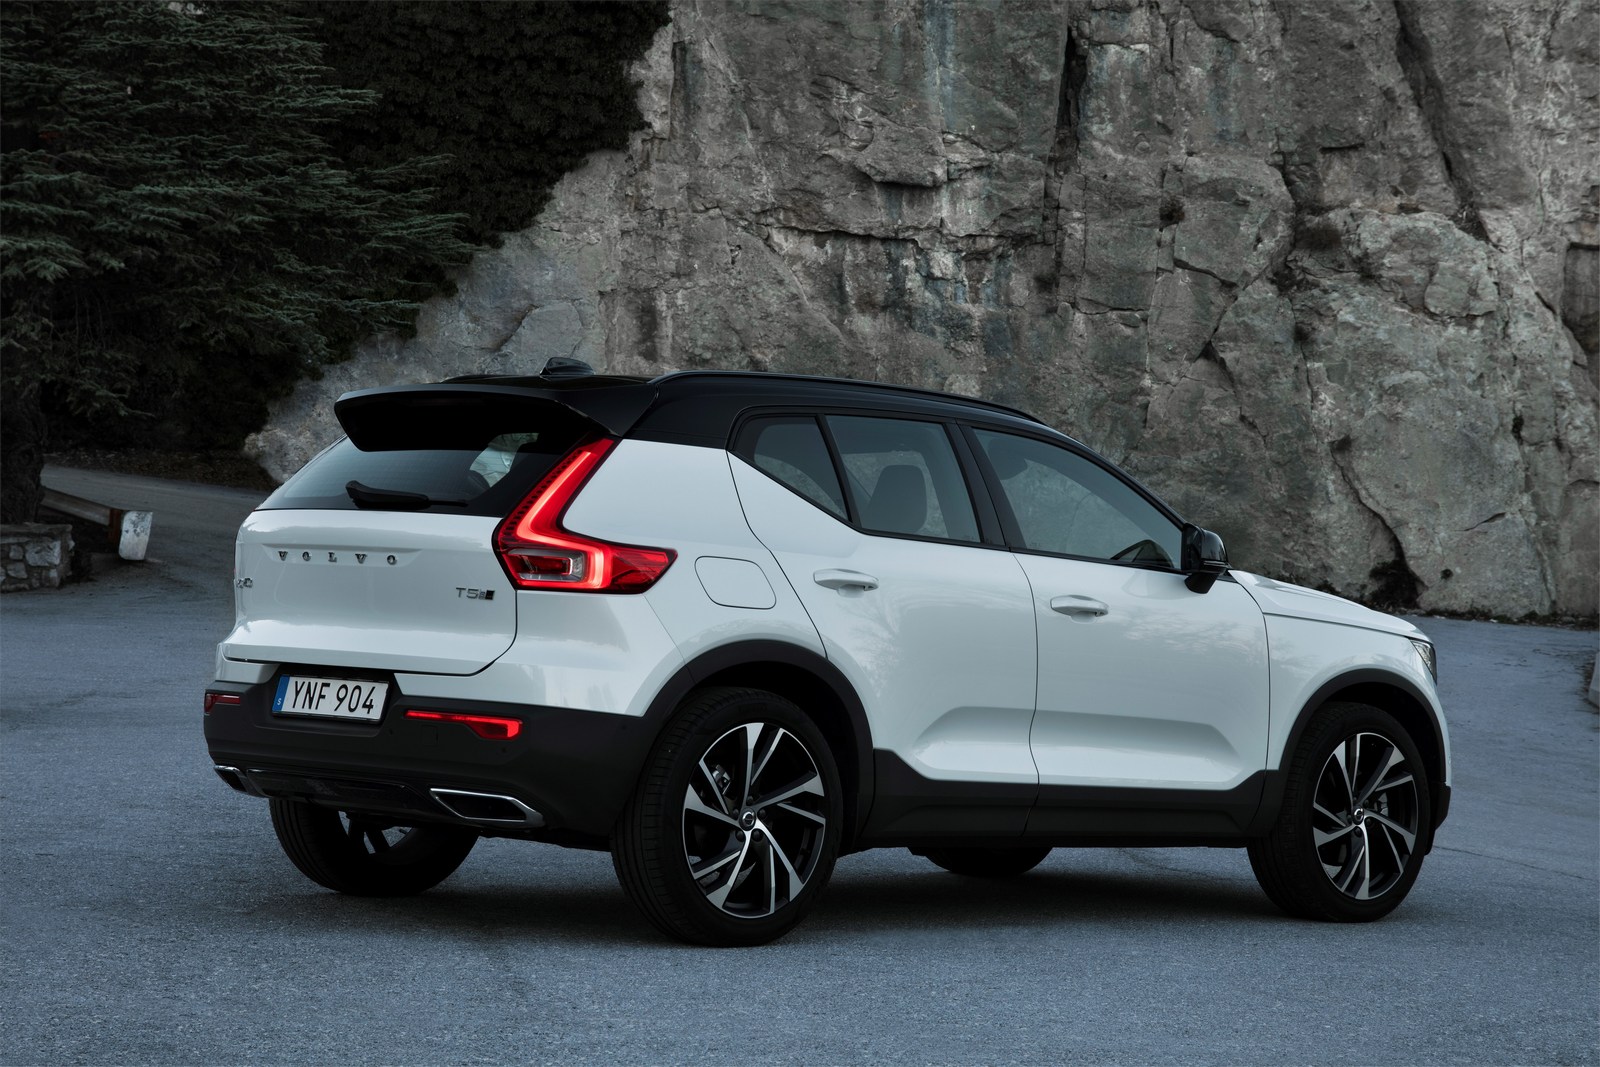 New Volvo XC40 Starts At $35,200, But You Can Also Subscribe For $600 A